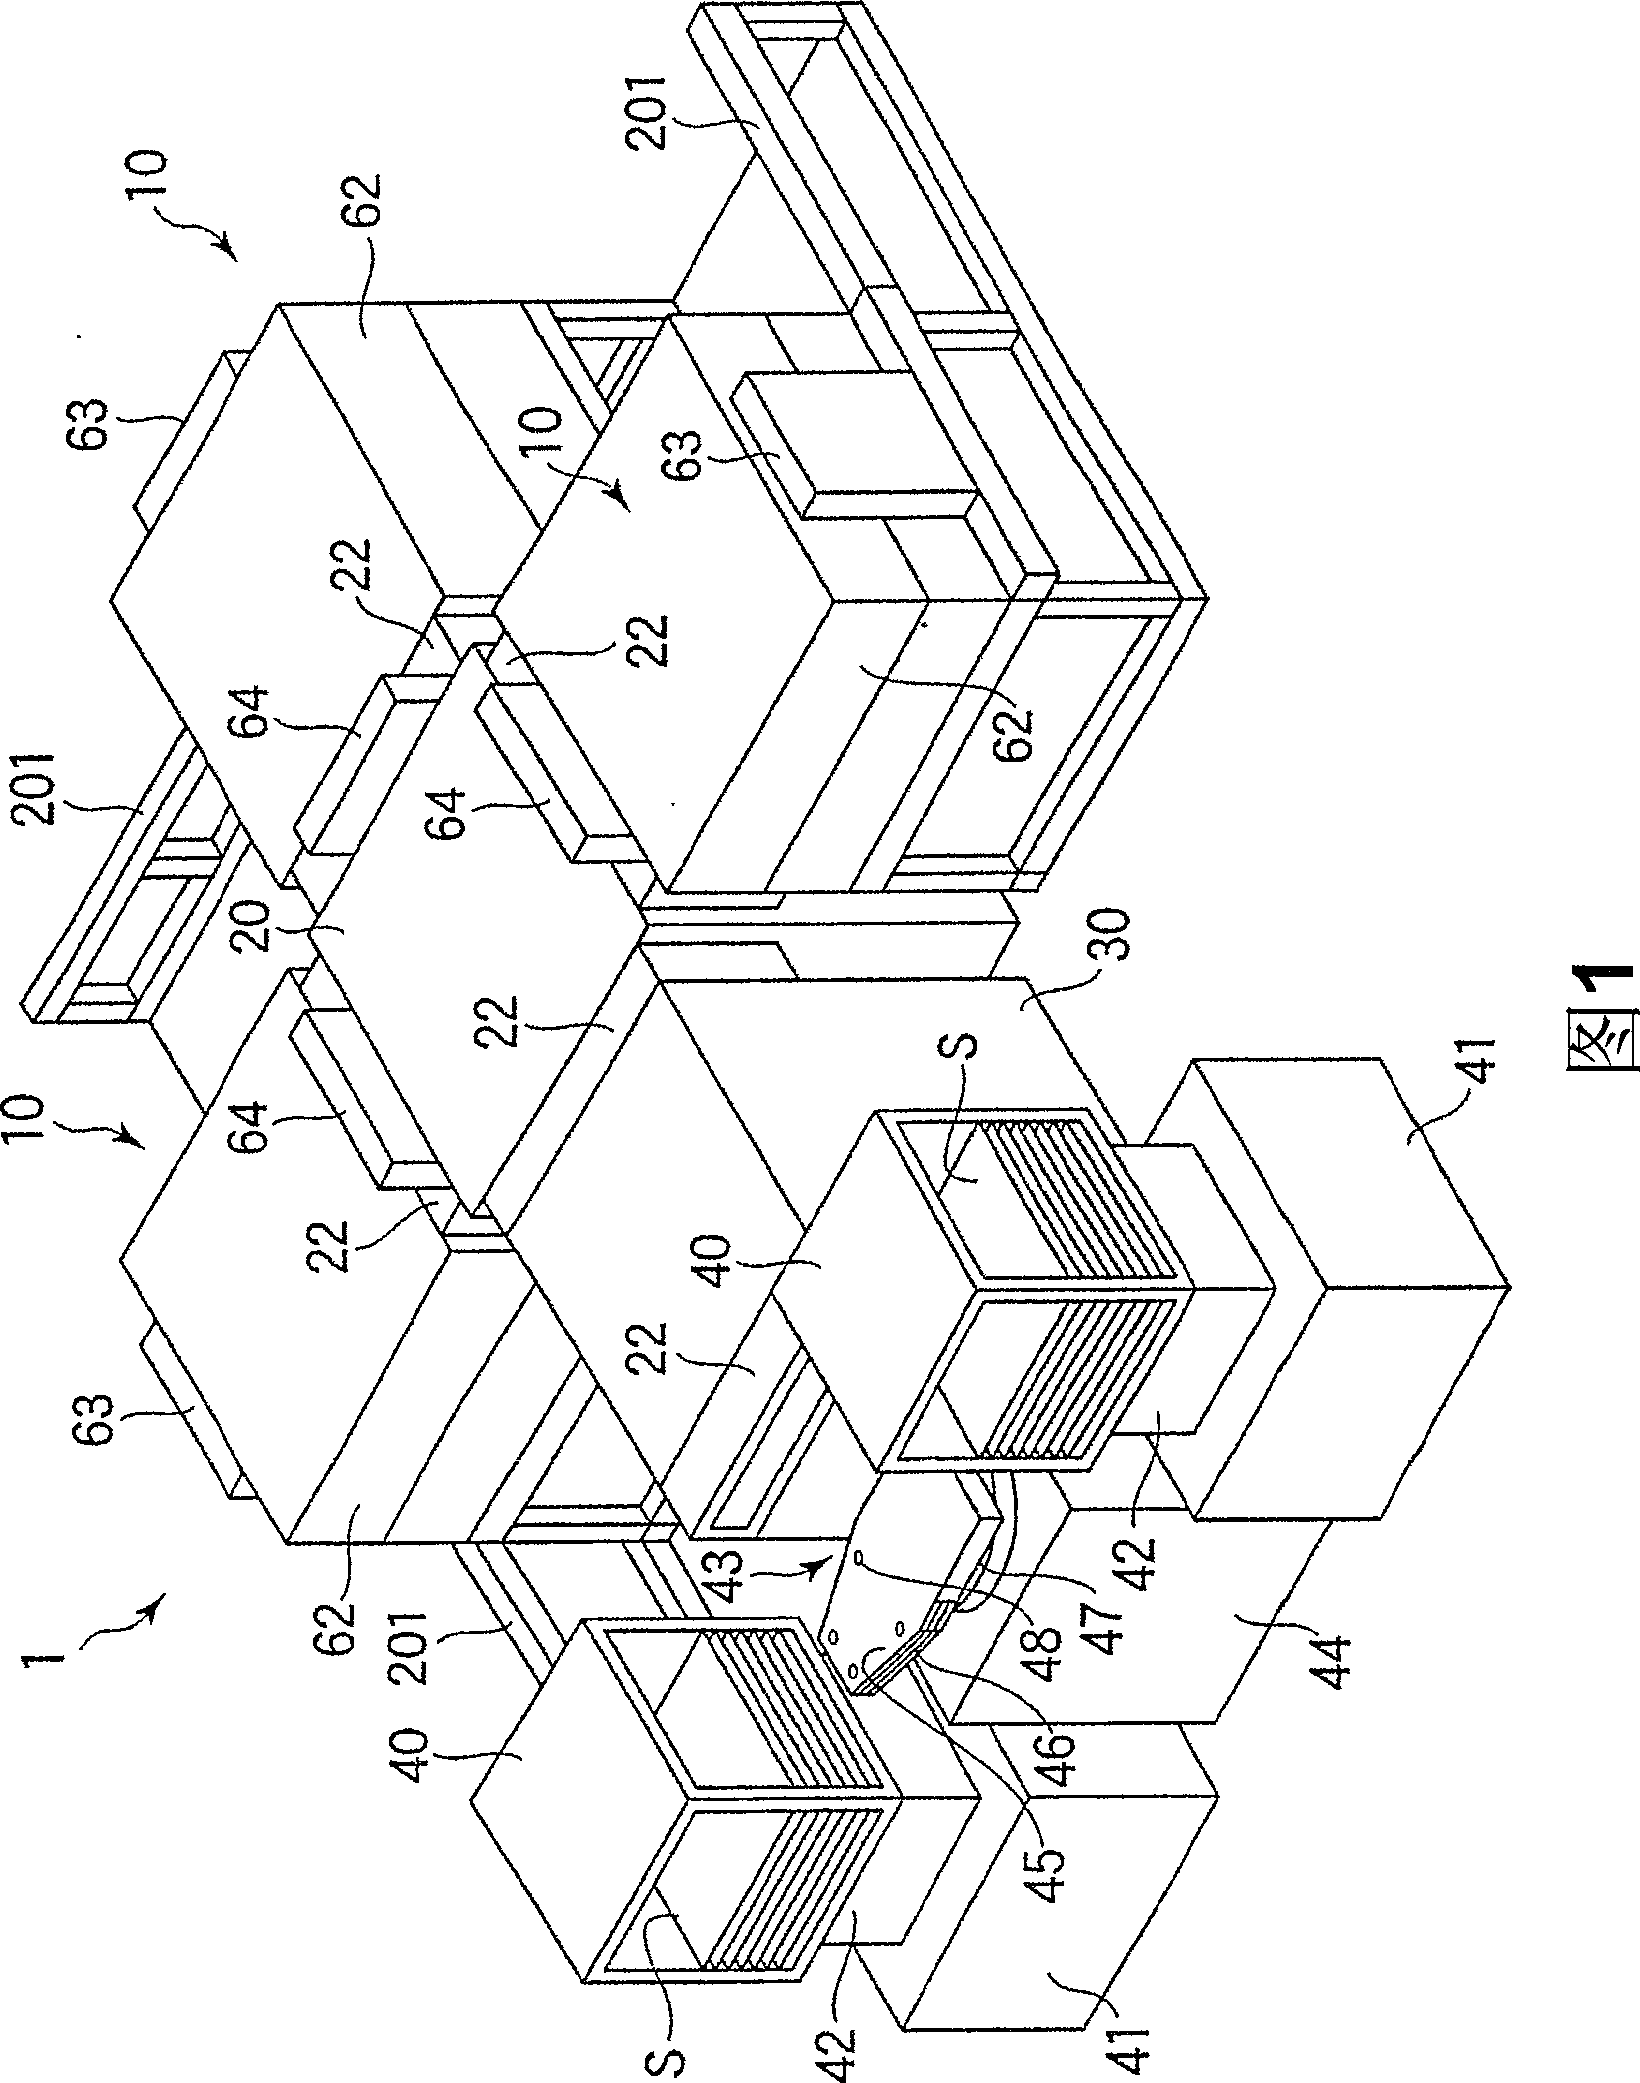 Substrate processing device and substrate processing system